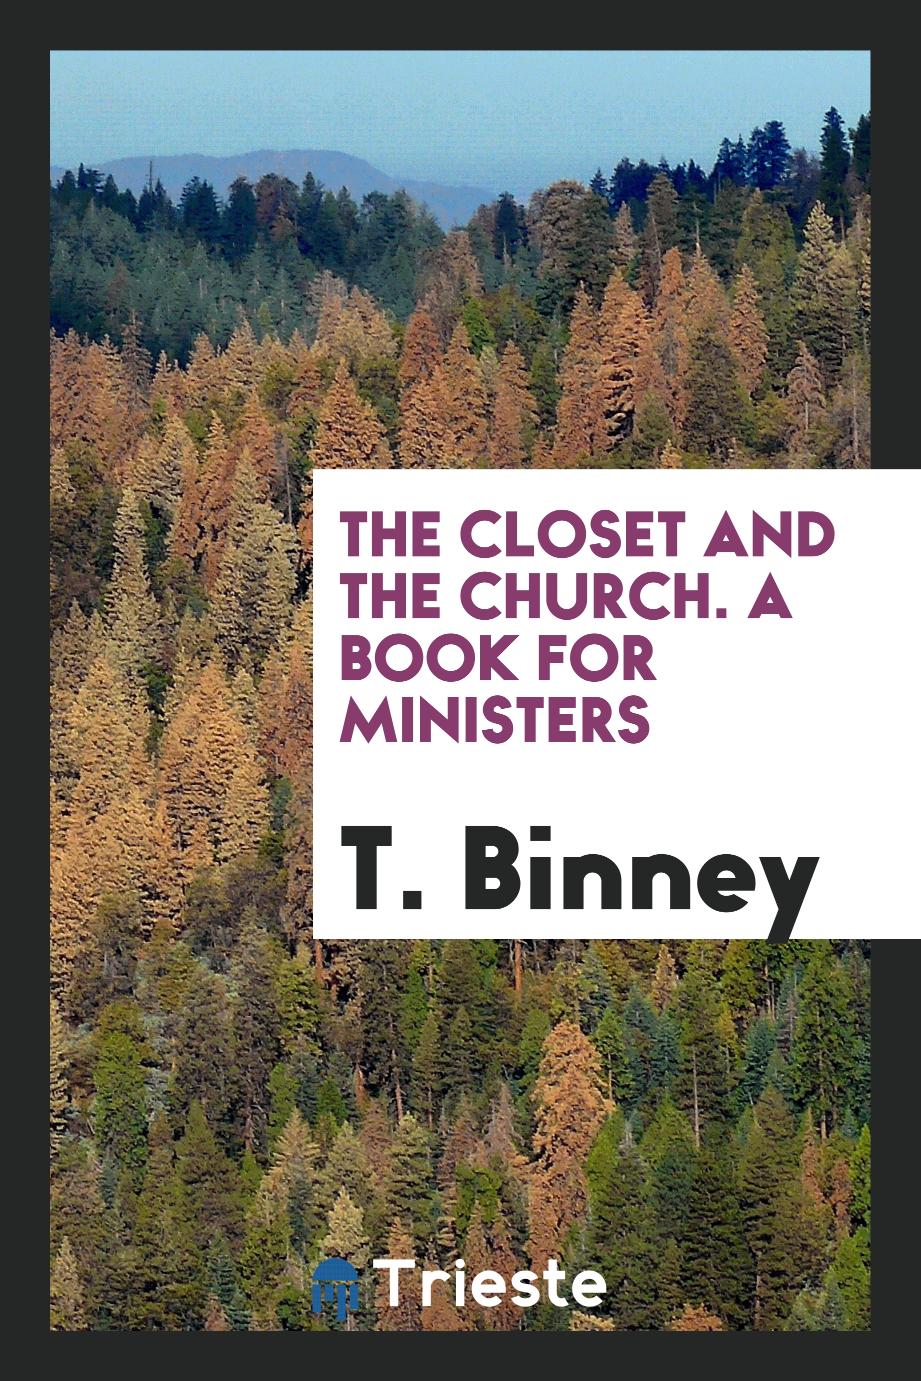 The closet and the church. A book for ministers